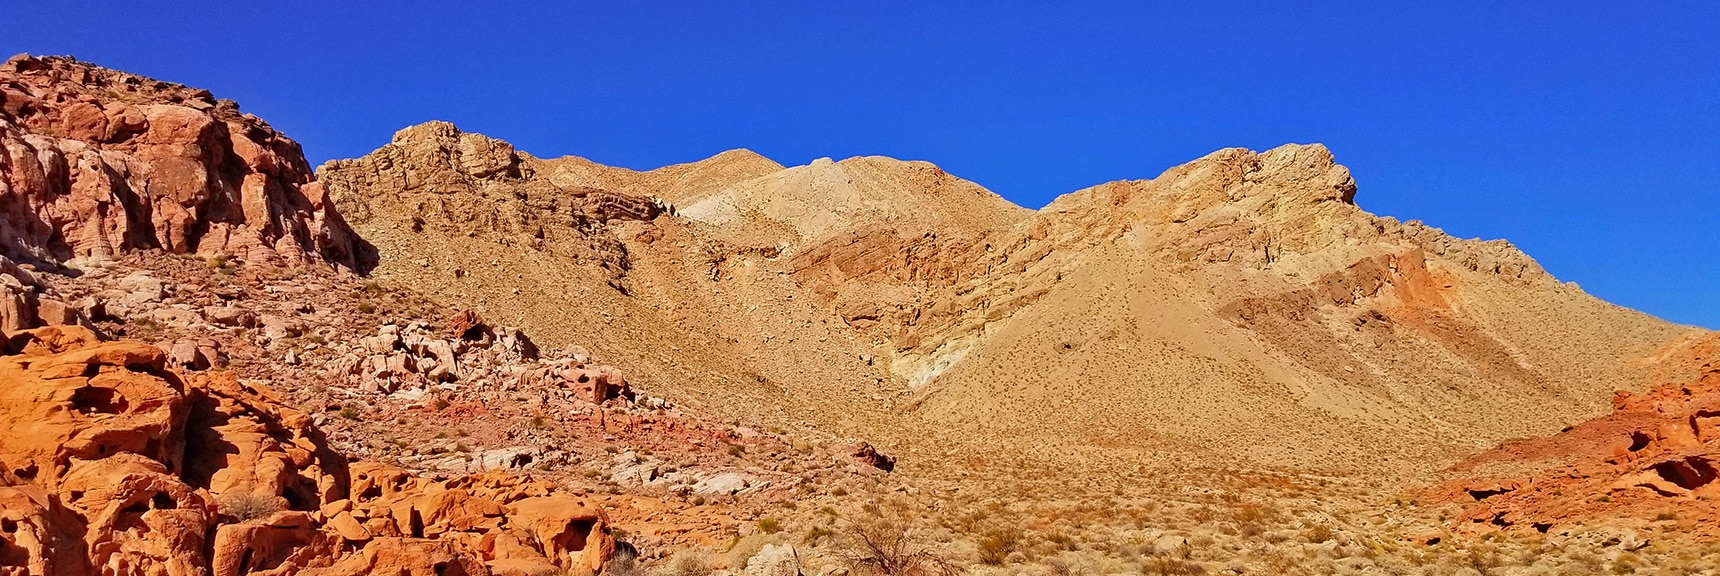 Northern End of the Bowl of Fire: Muddy Mountains, Possible Entrance to Anniversary Narrows Slot Canyon | Bowl of Fire, Lake Mead National Recreation Area, Nevada